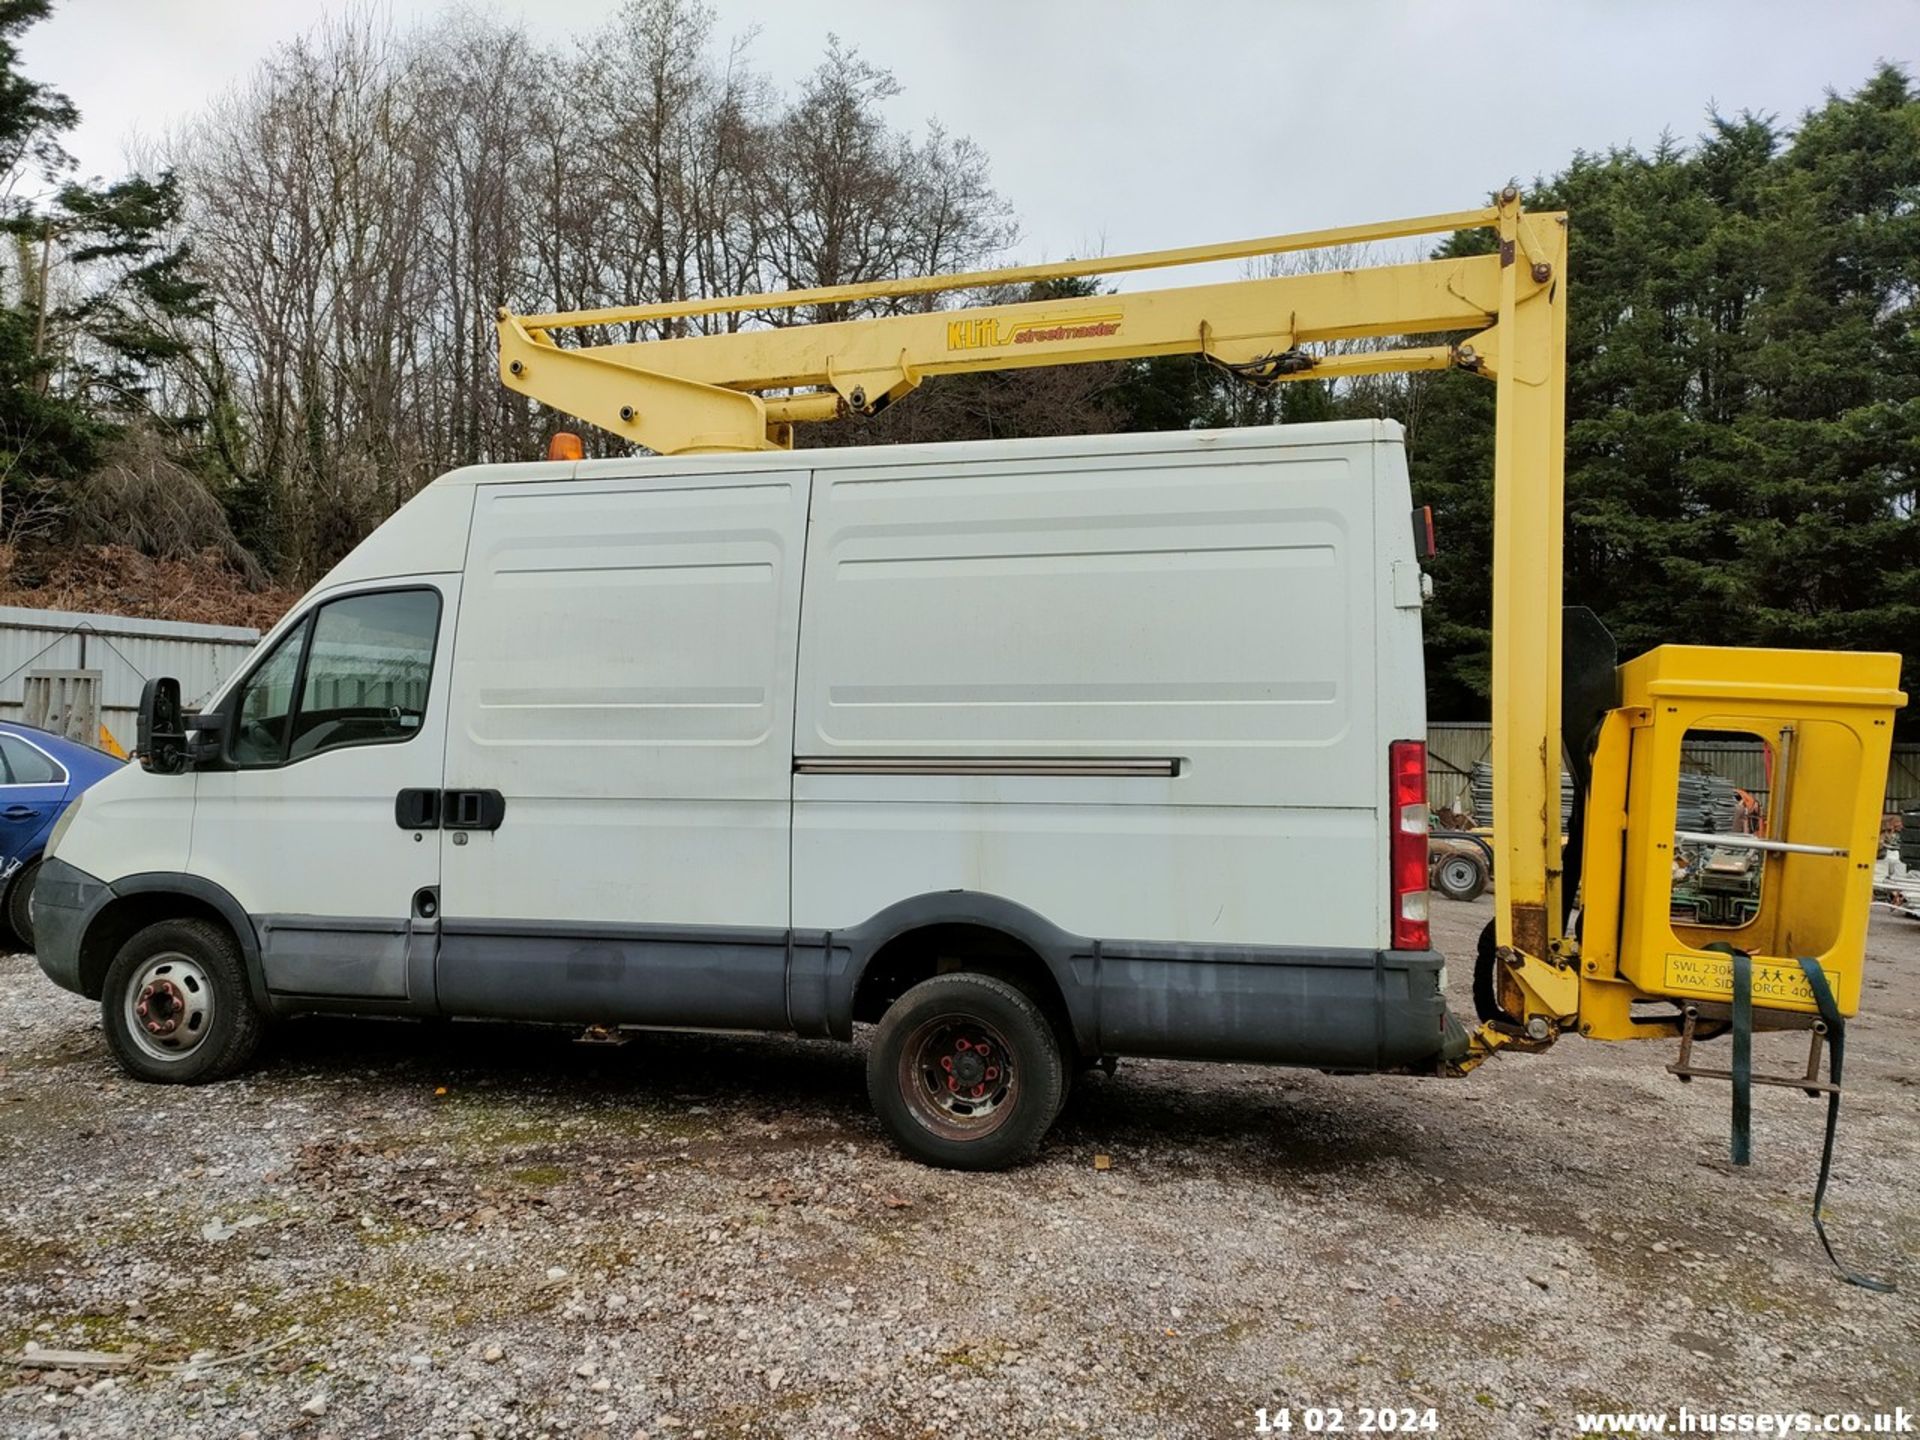 10/60 IVECO DAILY 50C15 - 2998cc (White) - Image 11 of 33